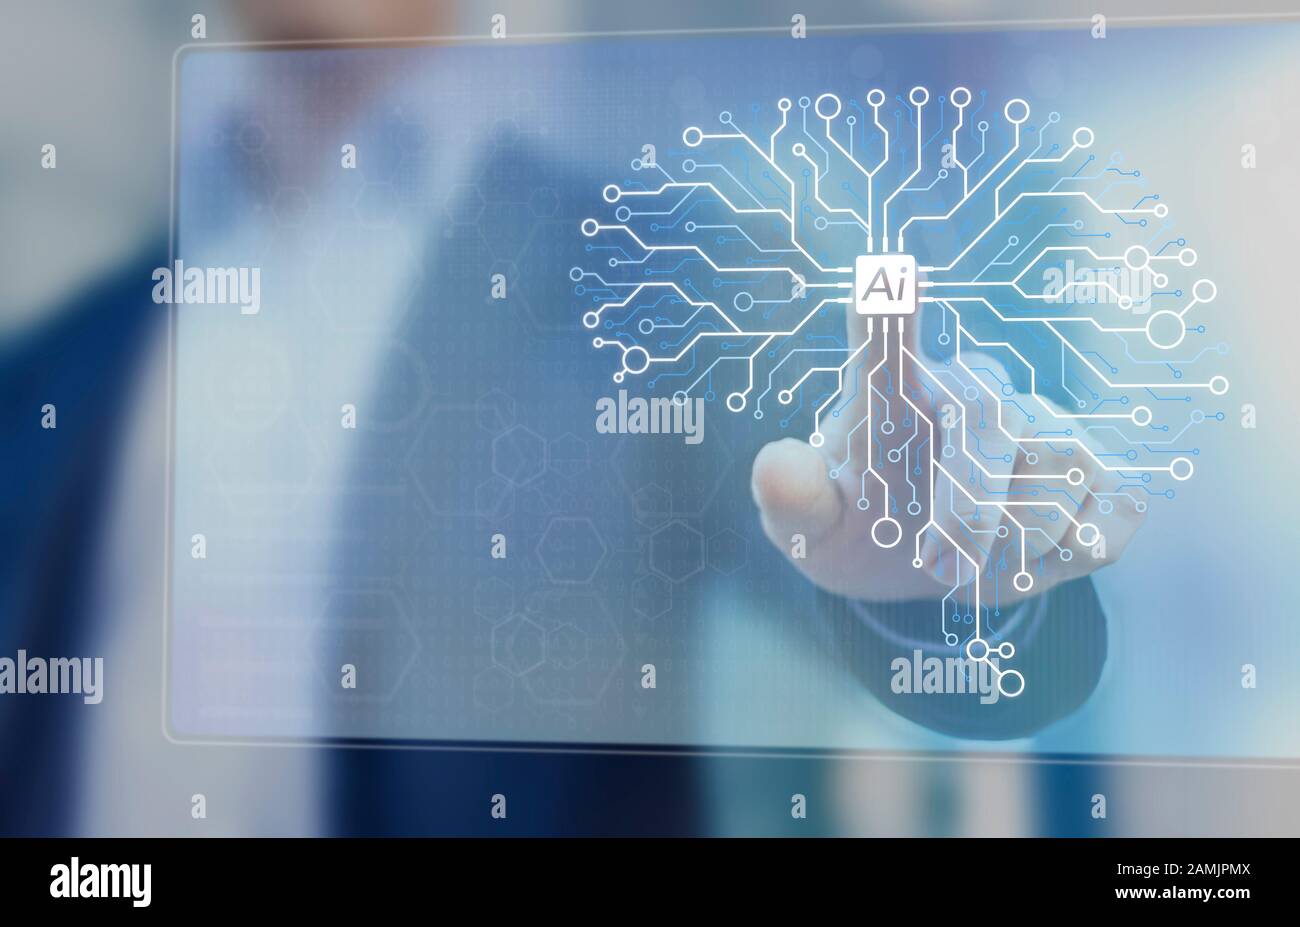 Artificial Intelligence and Machine Learning technology to automate processes, concept with AI engineer working on electronic circuit brain neural net Stock Photo